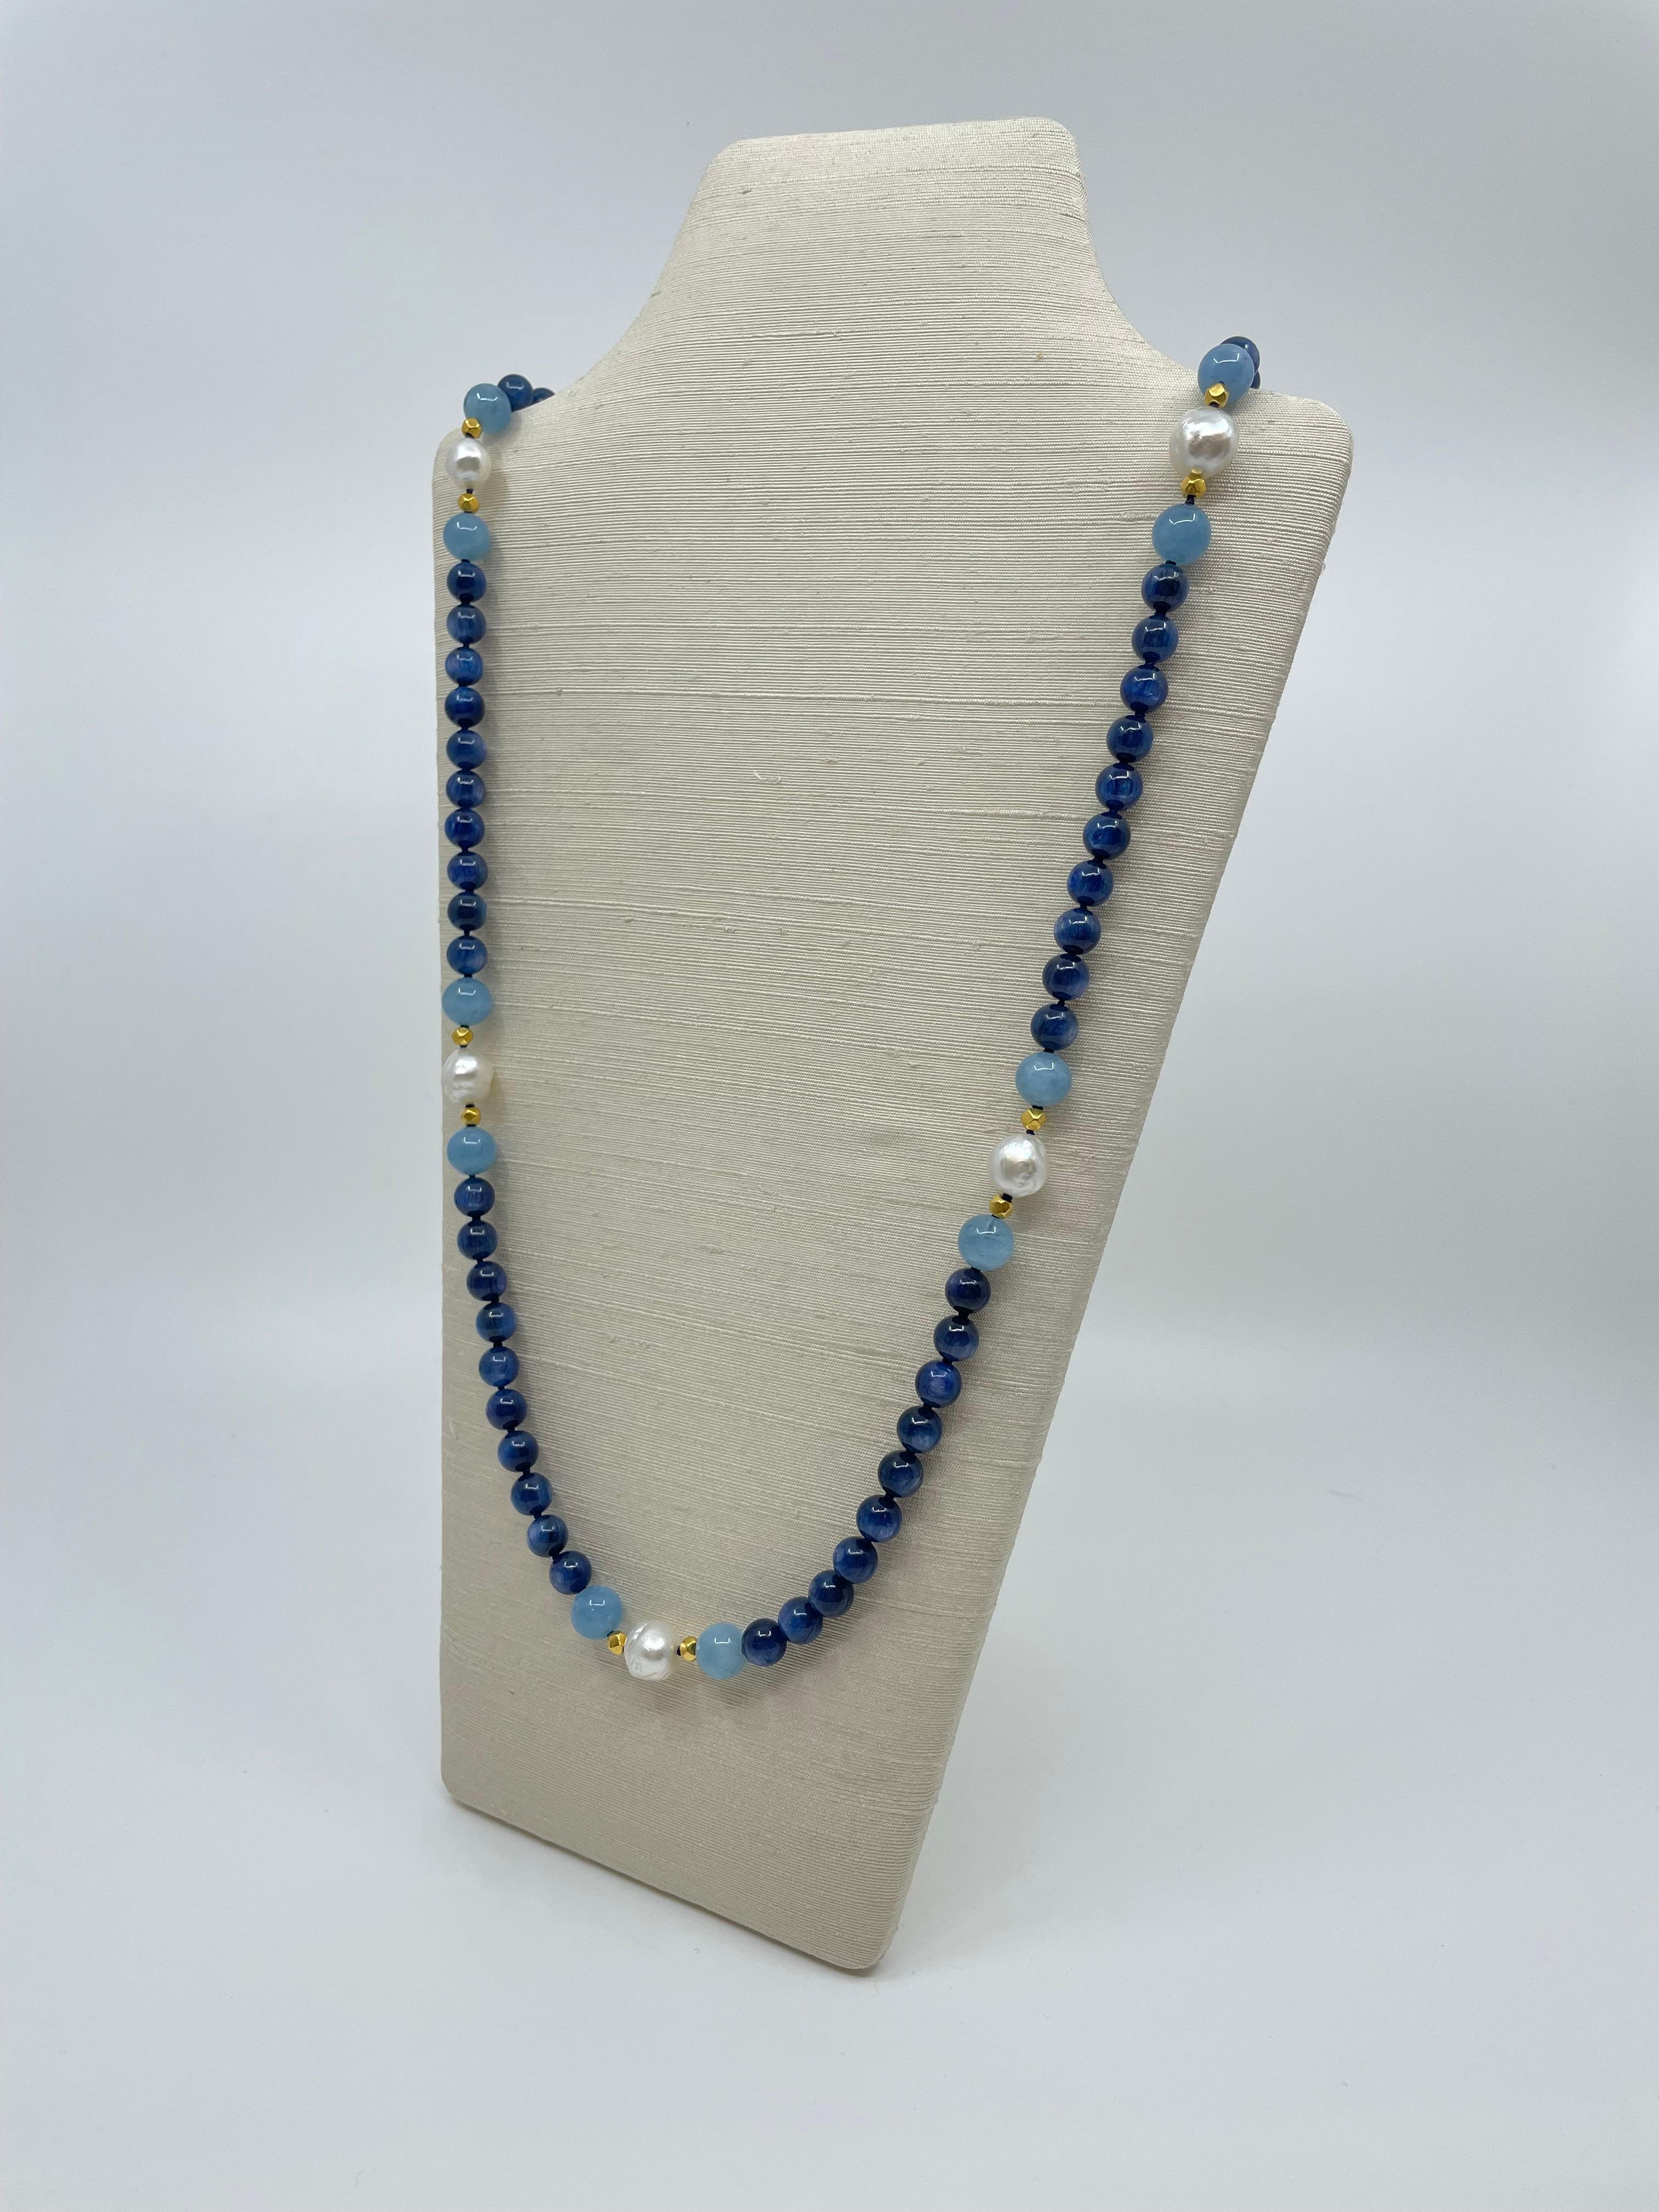 Long Necklace with Kyanite, Aquamarine, South Sea Pearls & 18K Solid Gold Beads For Sale 2